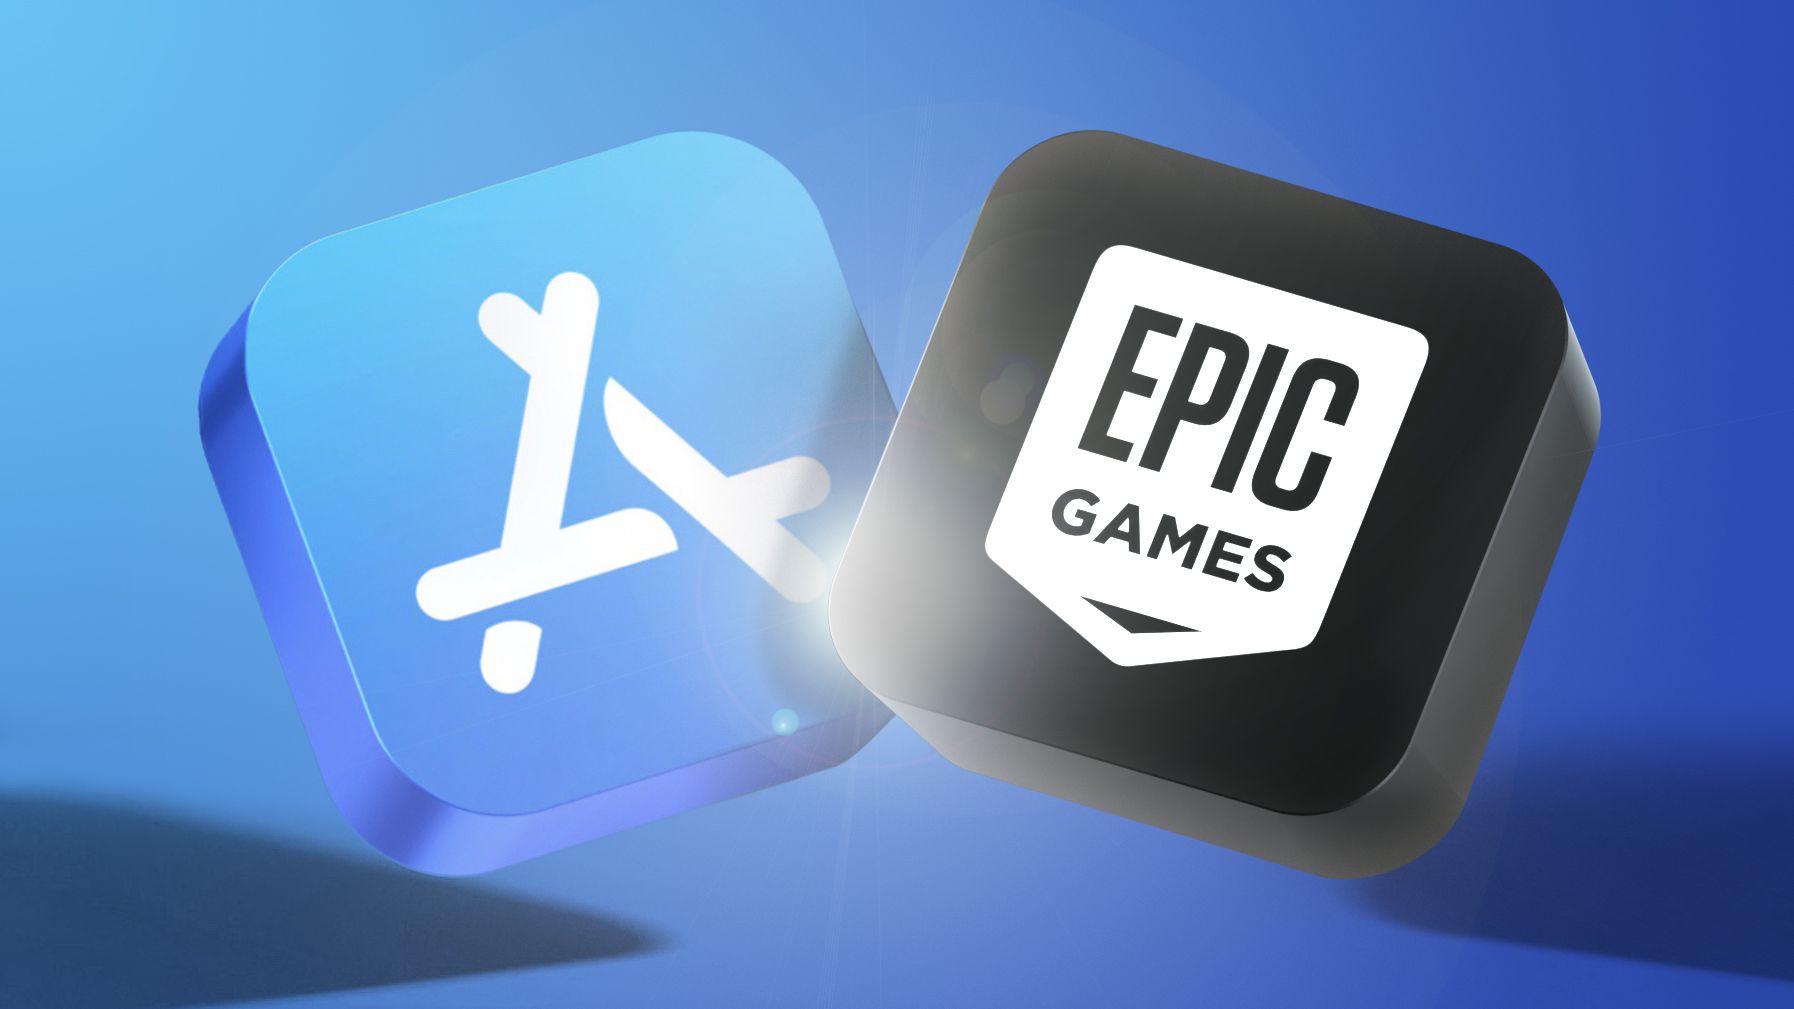 Epic Games CEO to Speak in South Korea Next Week Against the App Store Amid Ongoing Tensions With Apple